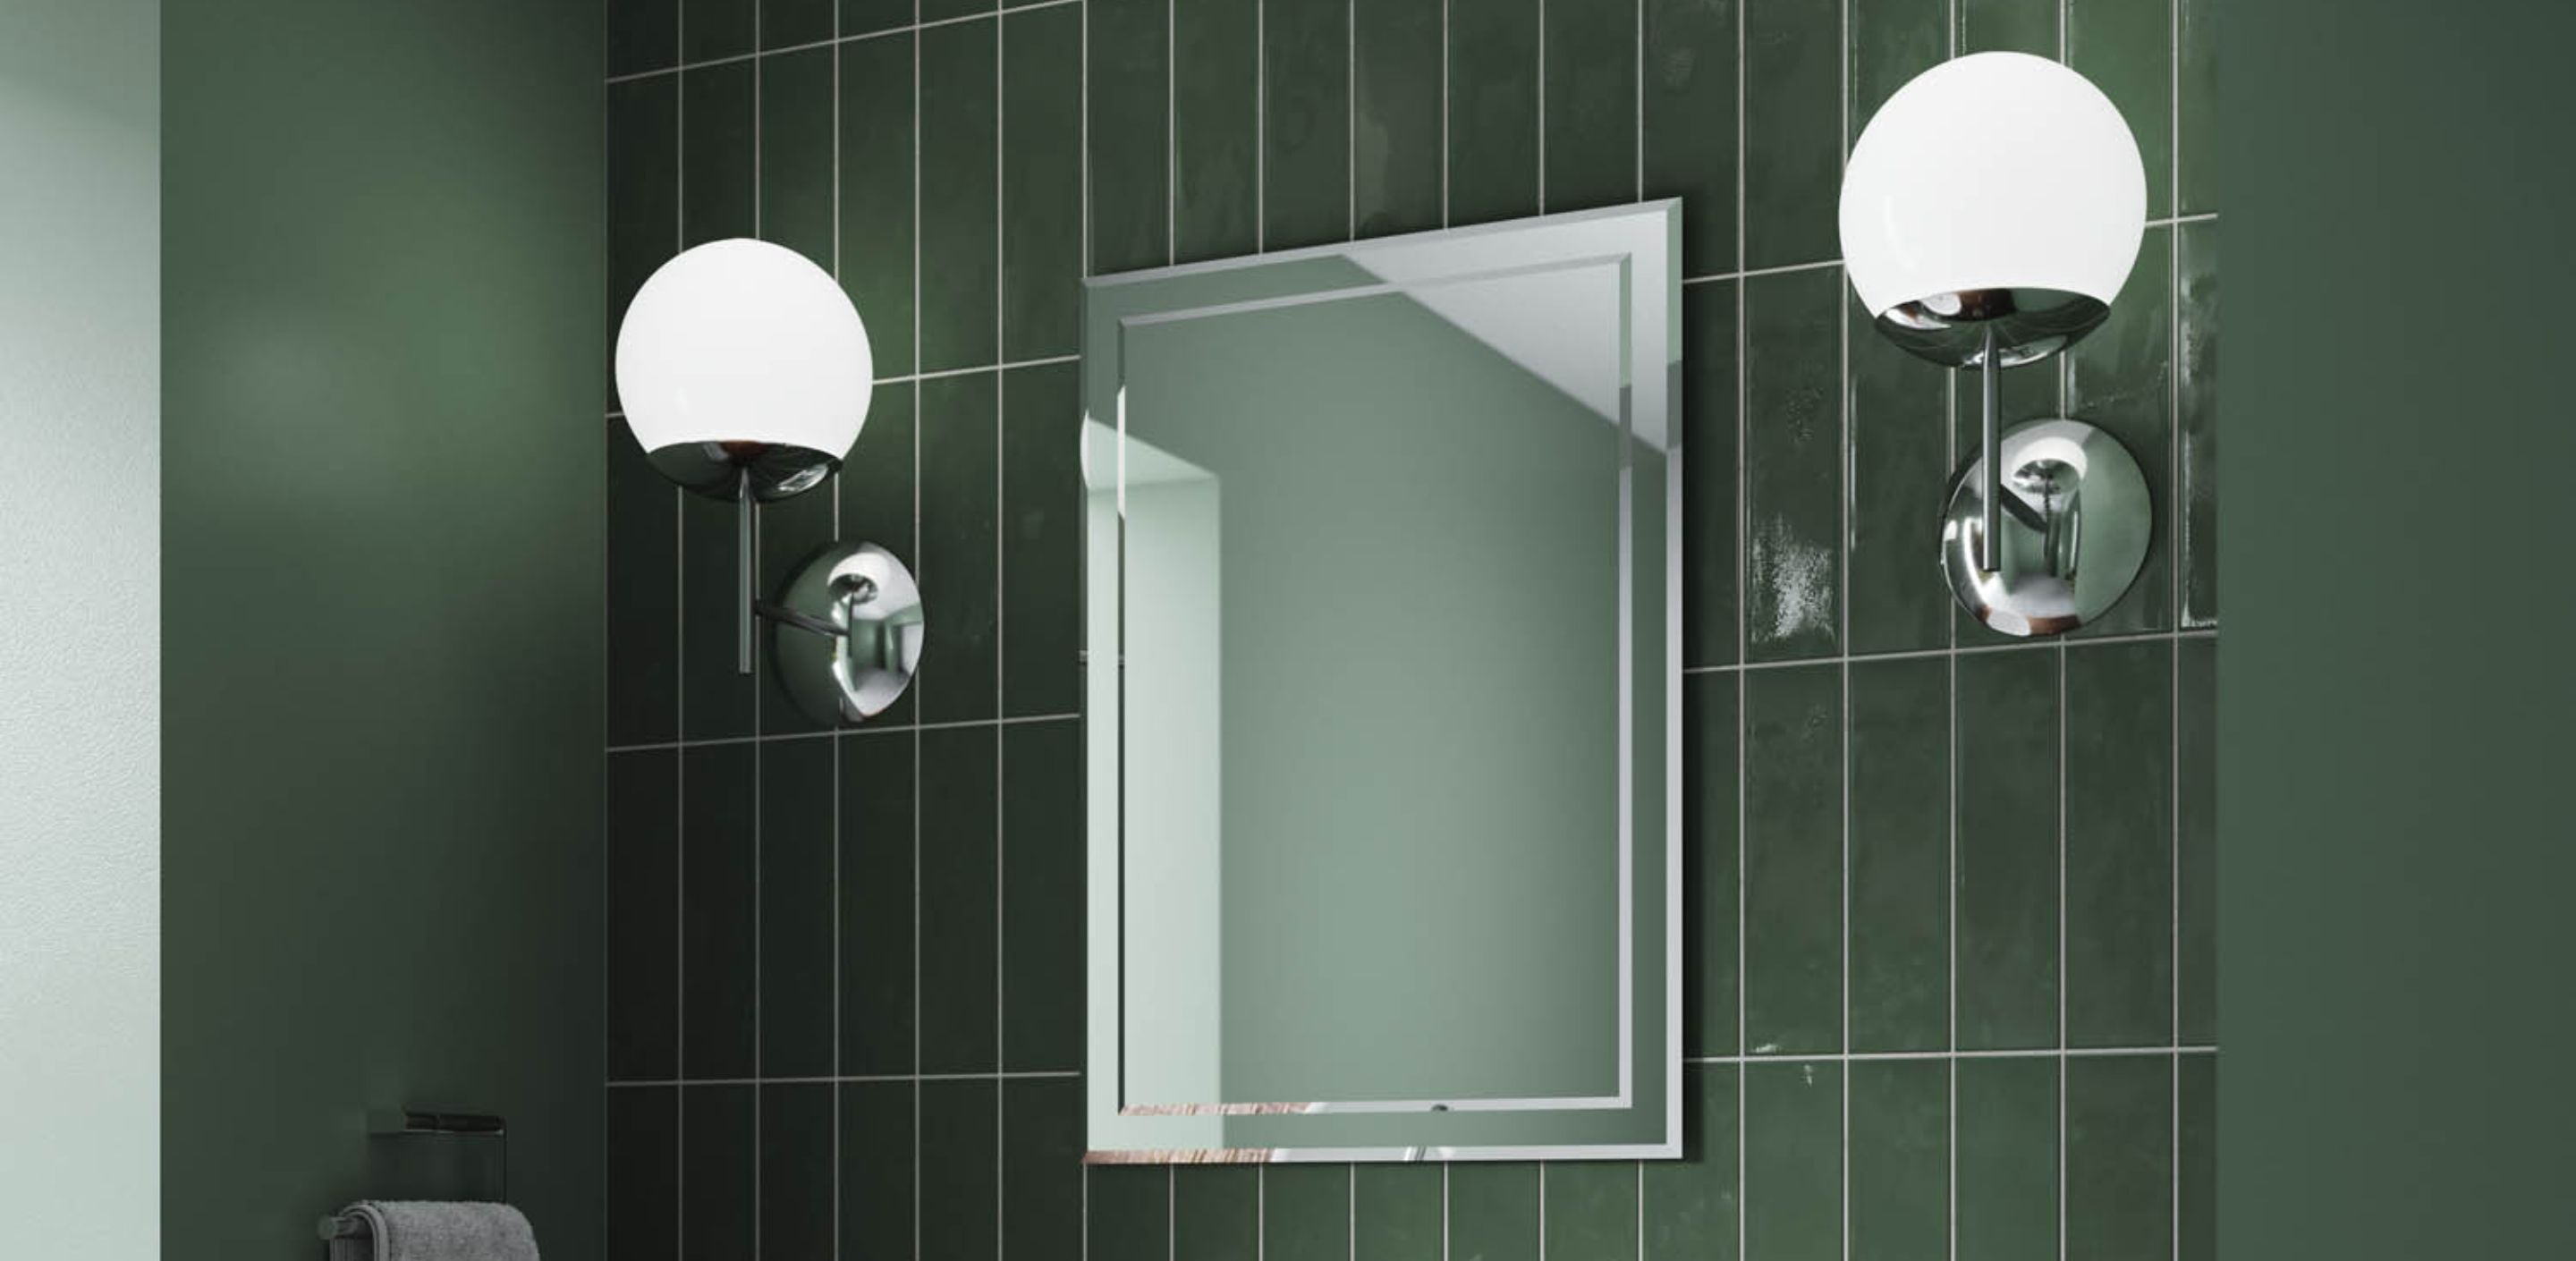 Just Landed: Introducing Our New Range of Non-illuminated Mirrors